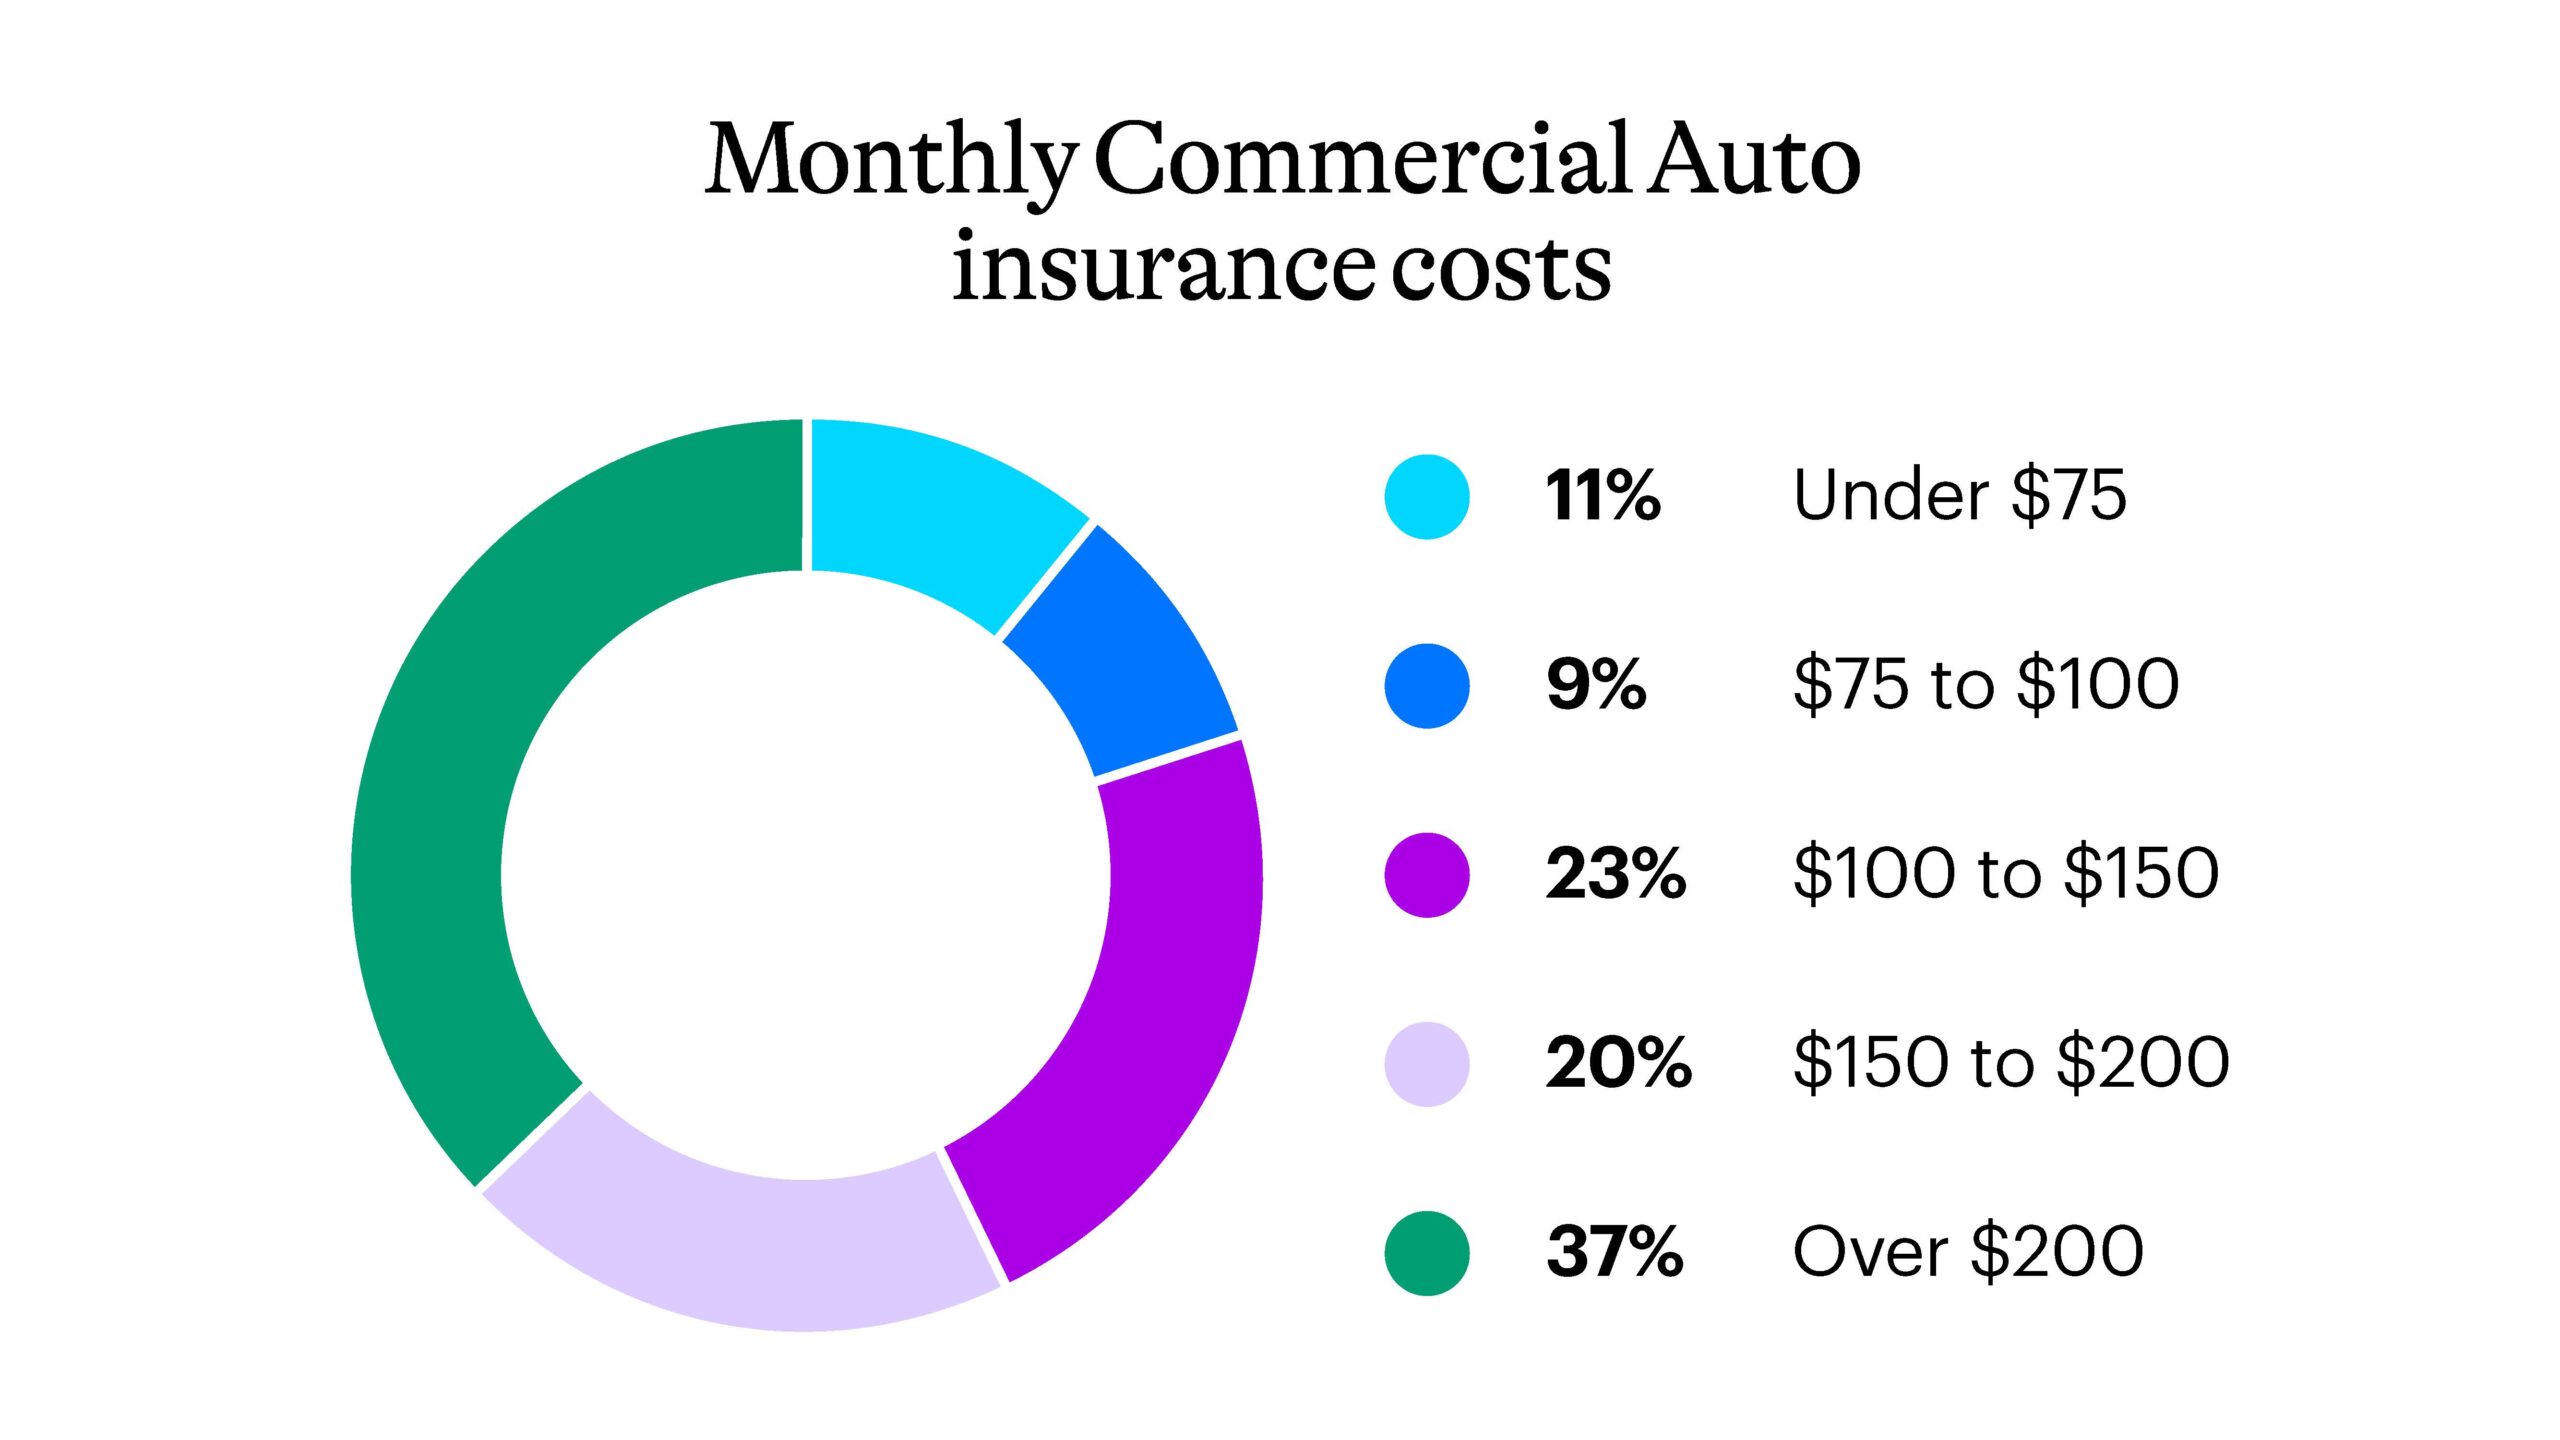 Monthly Commercial Auto insurance costs